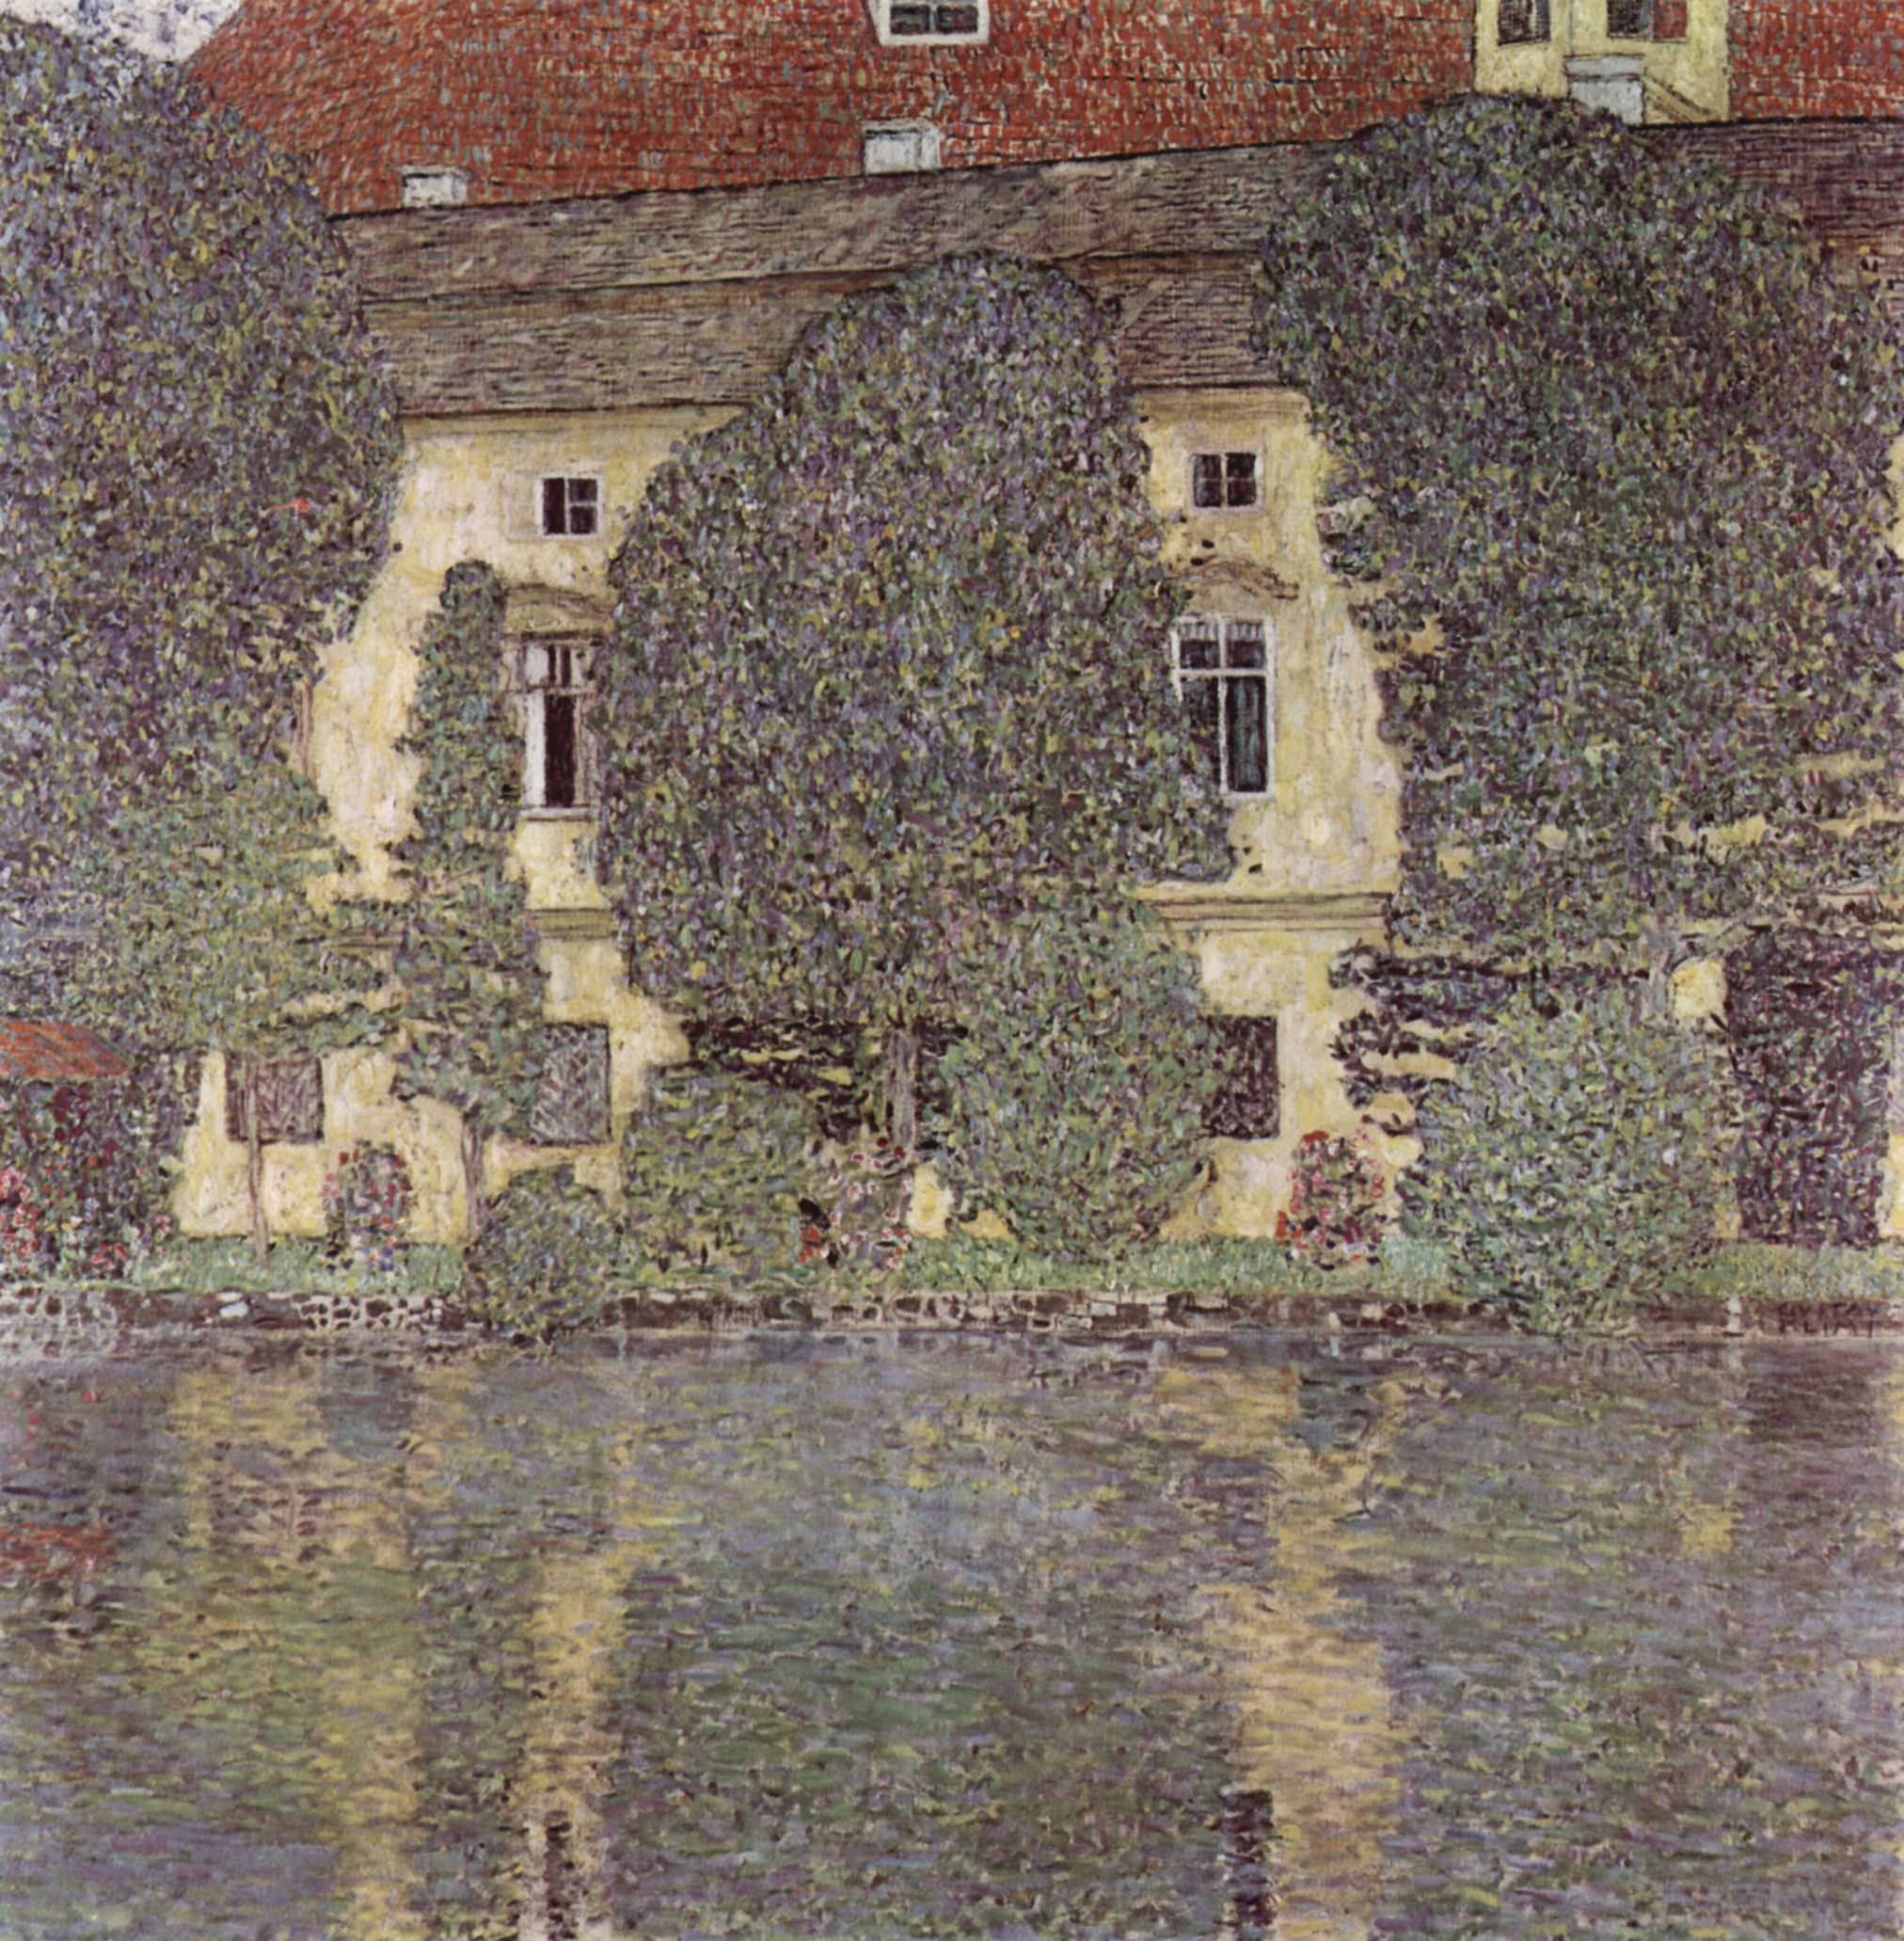 The Schloss Kammer on the Attersee, III (1910).